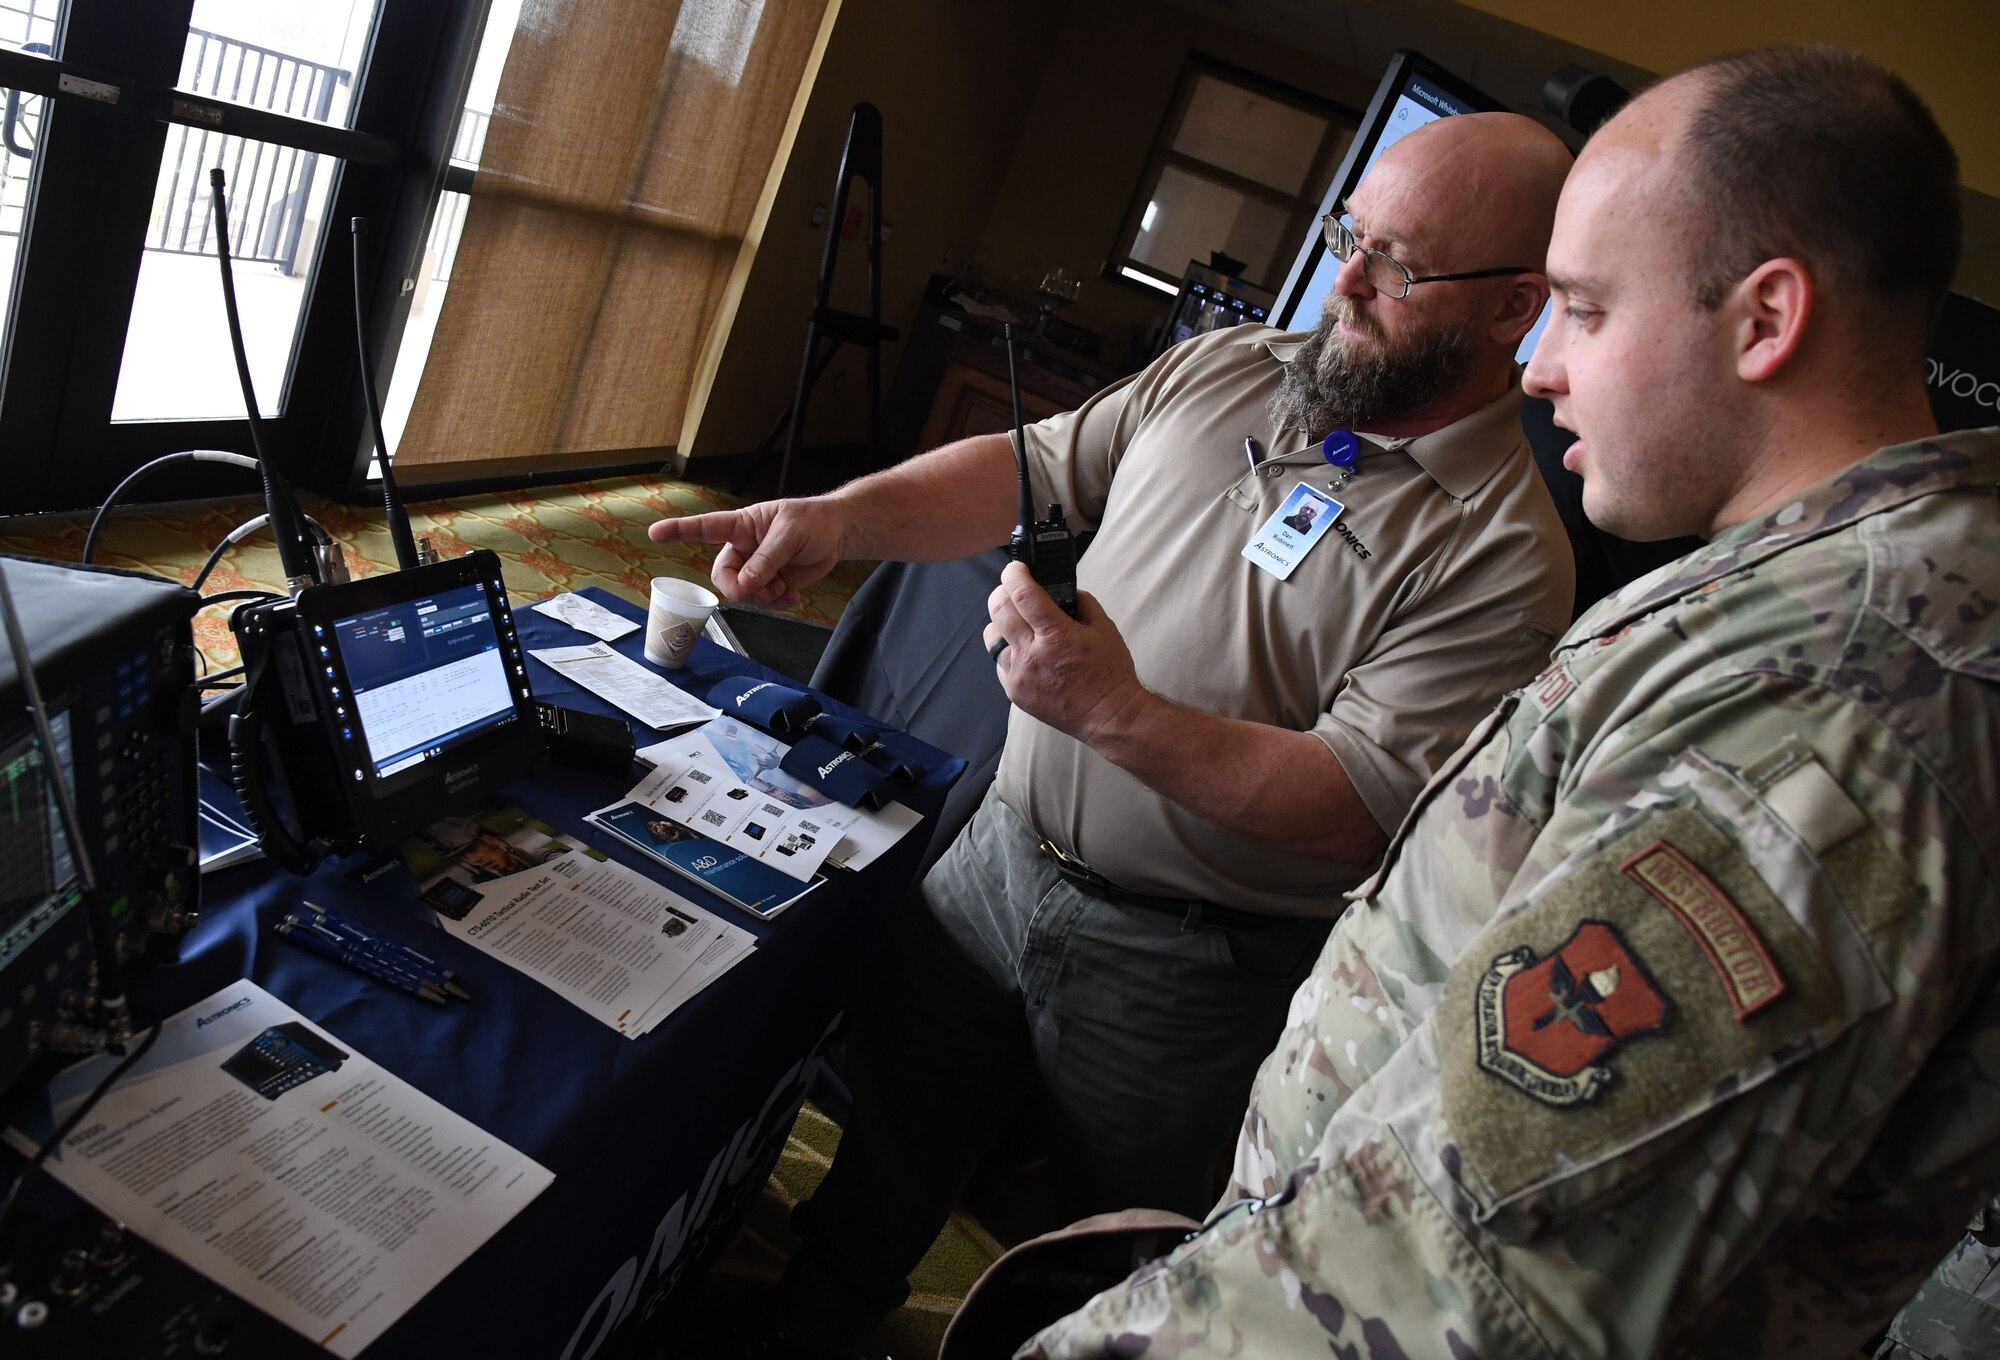 Dan Robinett, Astronics Test Systems product specialist, provides an equipment overview to U.S. Air Force Tech. Sgt. Jessie Ludlum, 333rd Training Squadron instructor, during the Technology Expo inside the Bay Breeze Event Center at Keesler Air Force Base, Mississippi, Feb. 16, 2023.